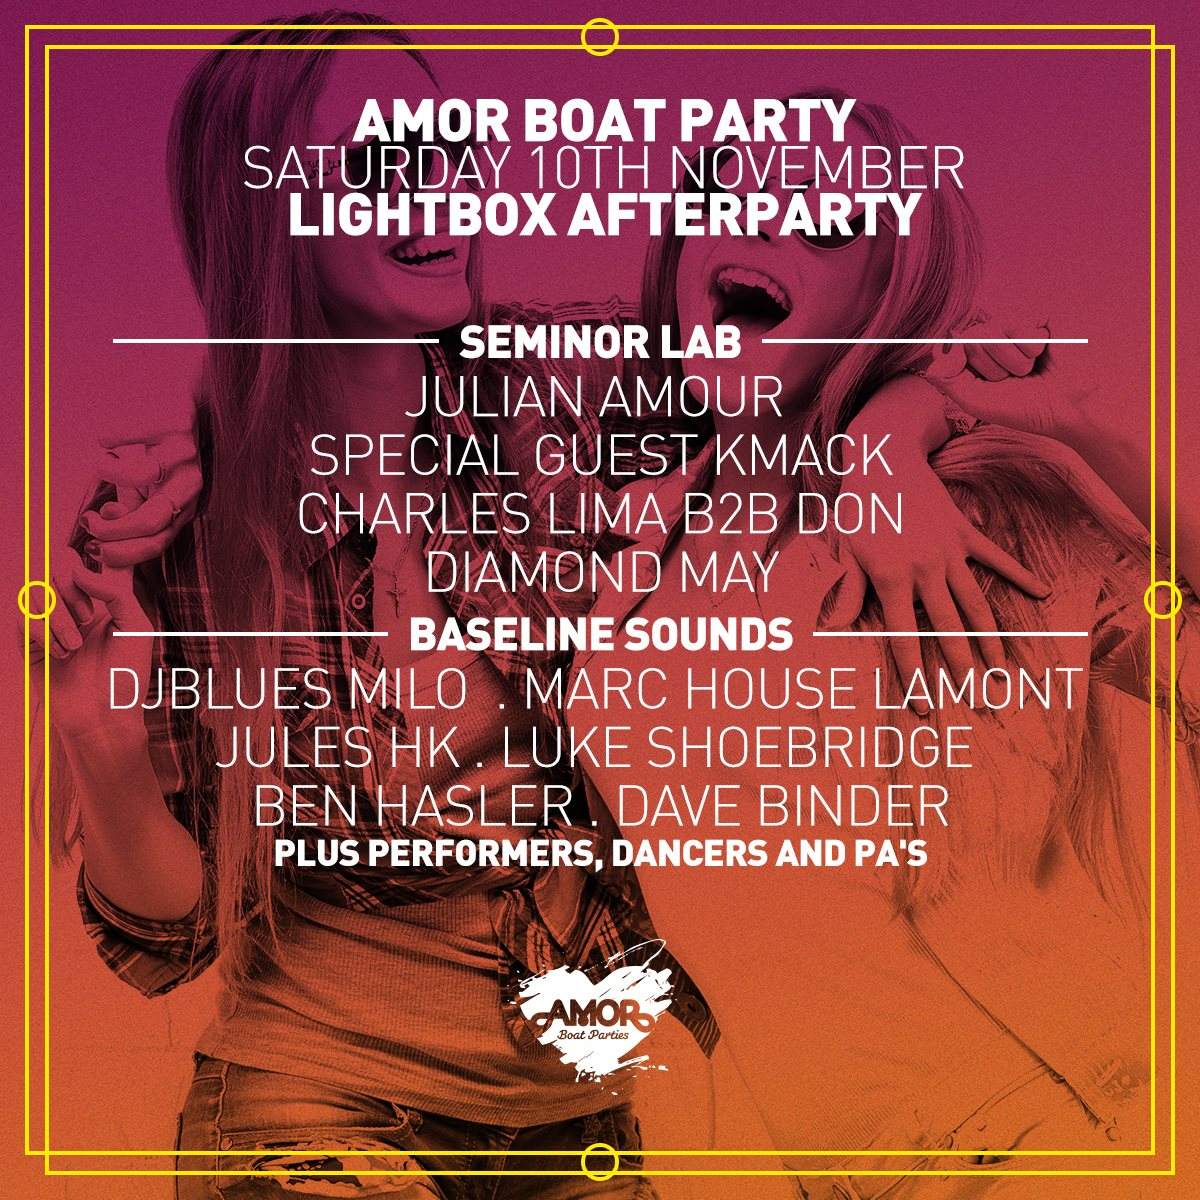 Amor London by Night Boat Party + Lightbox After-Party - Página frontal